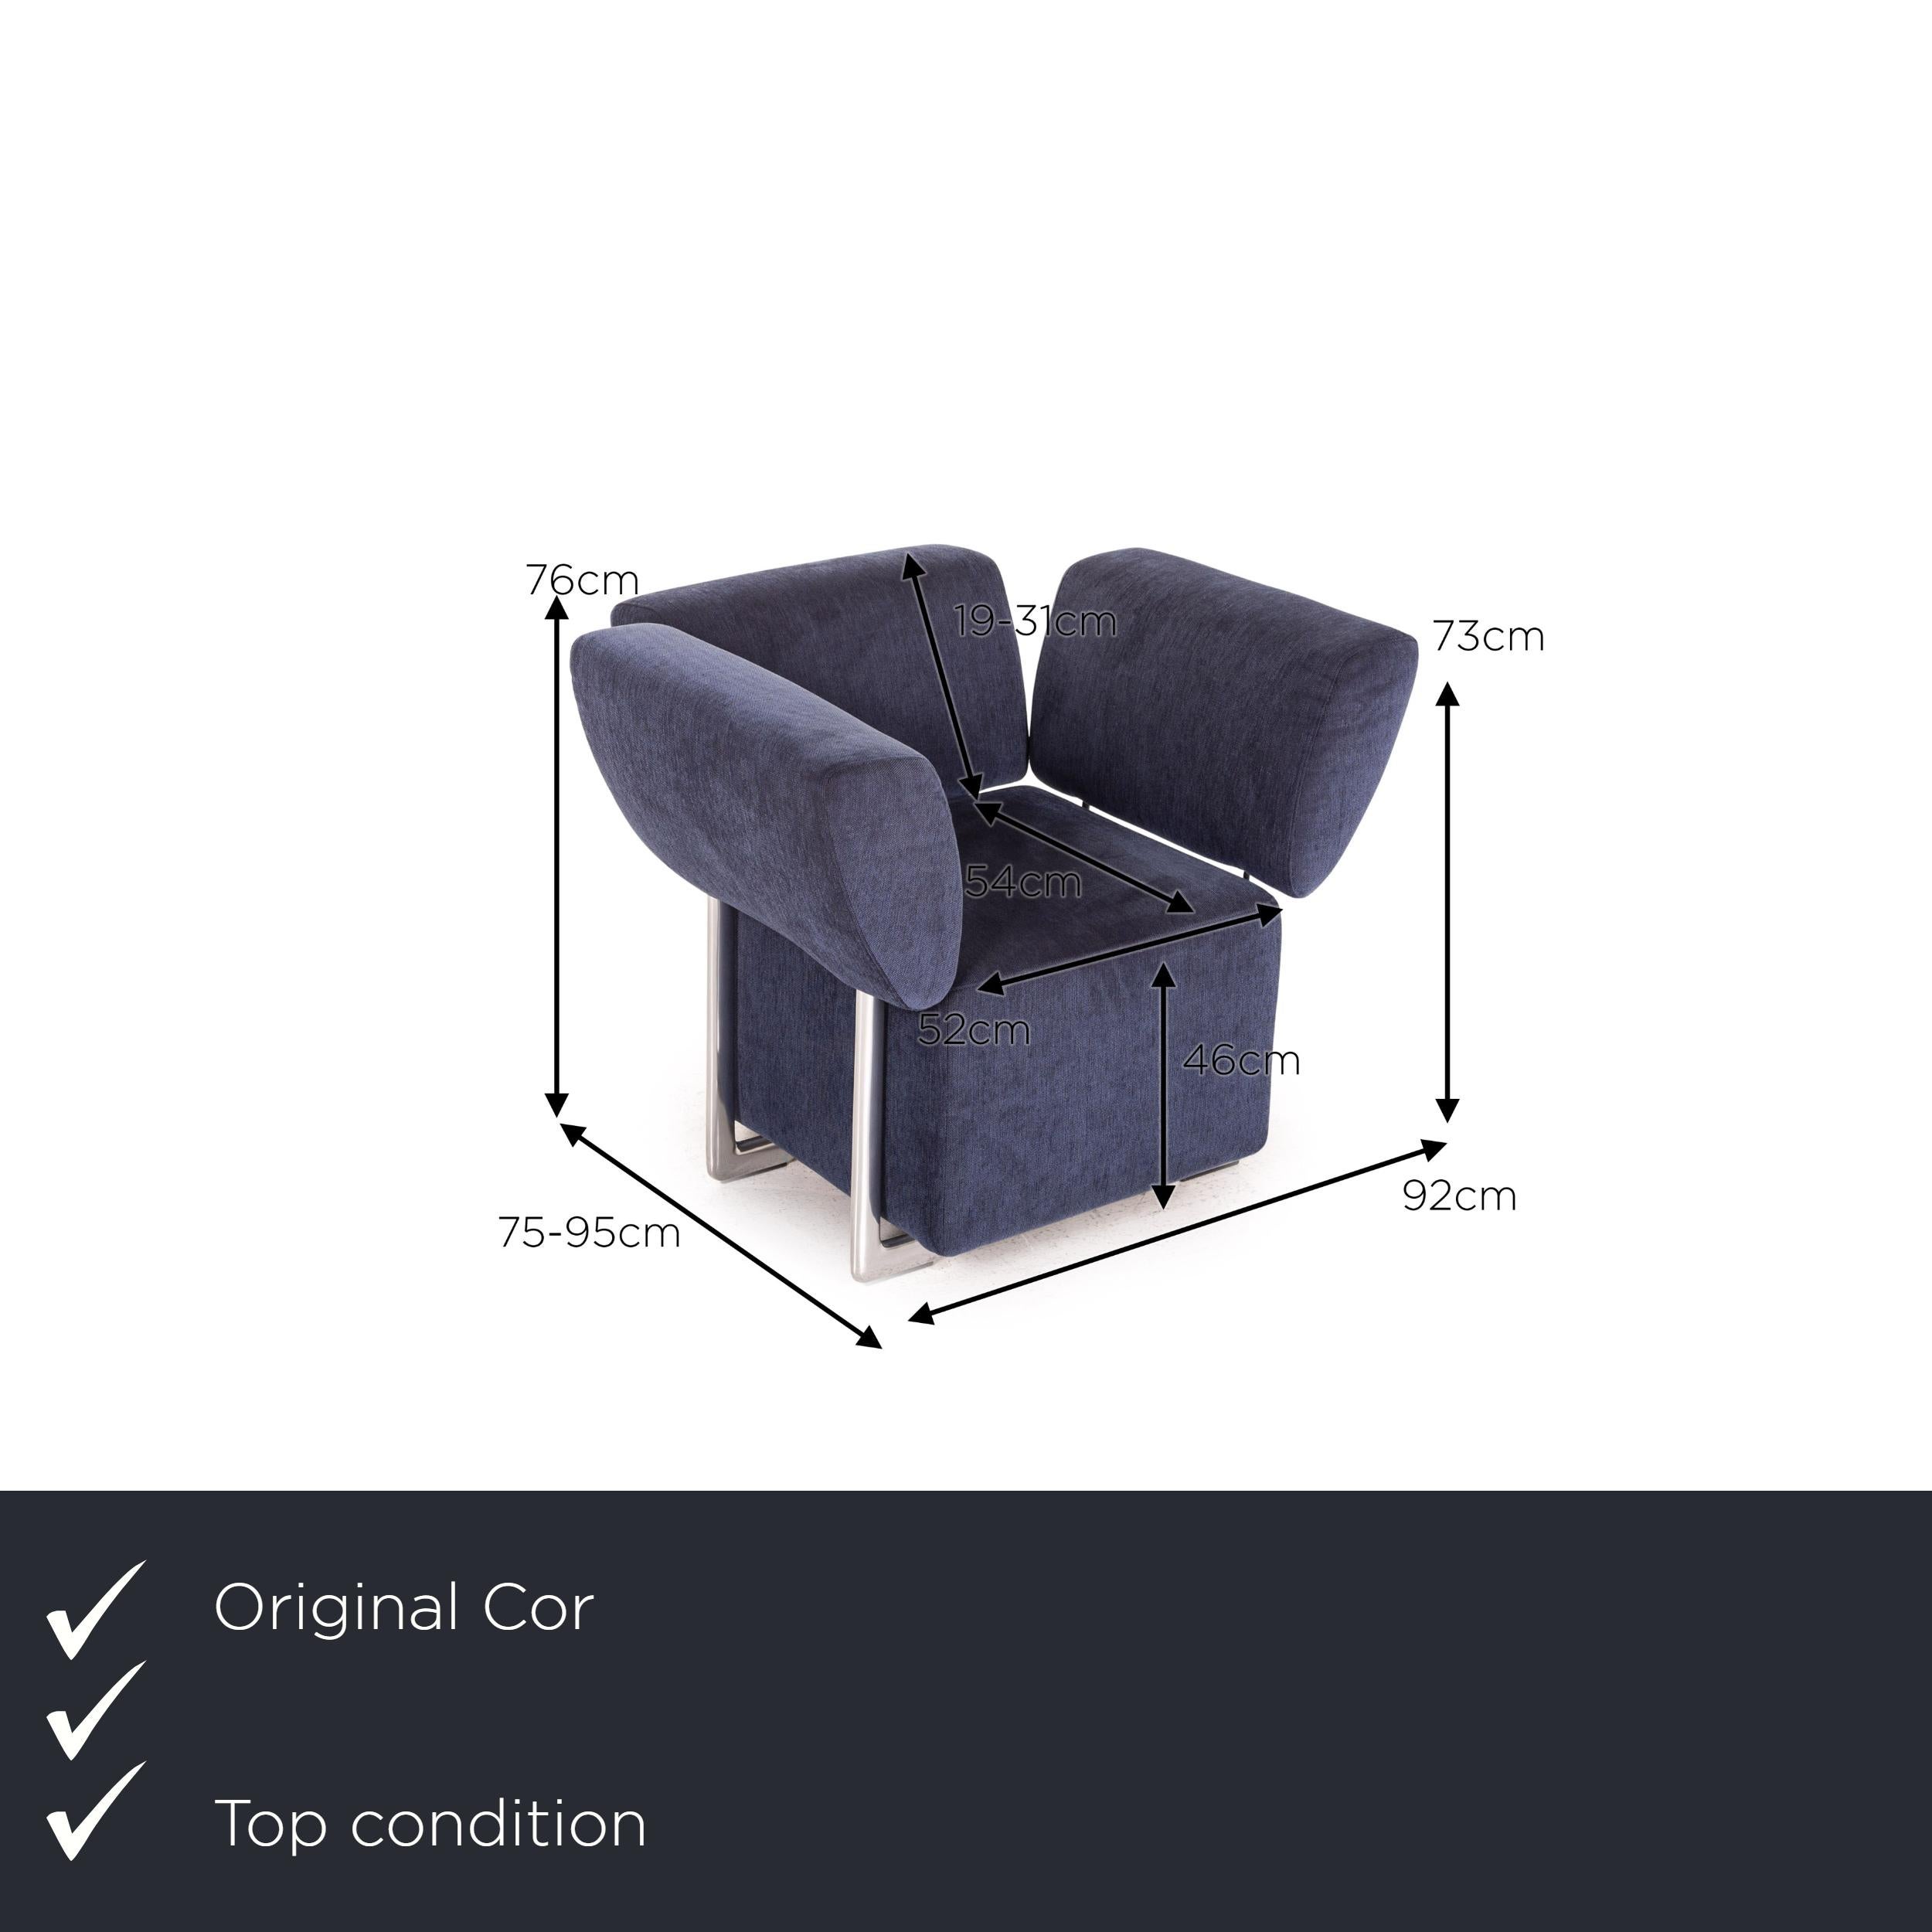 We present to you a COR Clou fabric armchair blue function.
  
 

 Product measurements in centimeters:
 

 depth: 75
 width: 92
 height: 76
 seat height: 46
 rest height: 73
 seat depth: 54
 seat width: 52
 back height: 19.